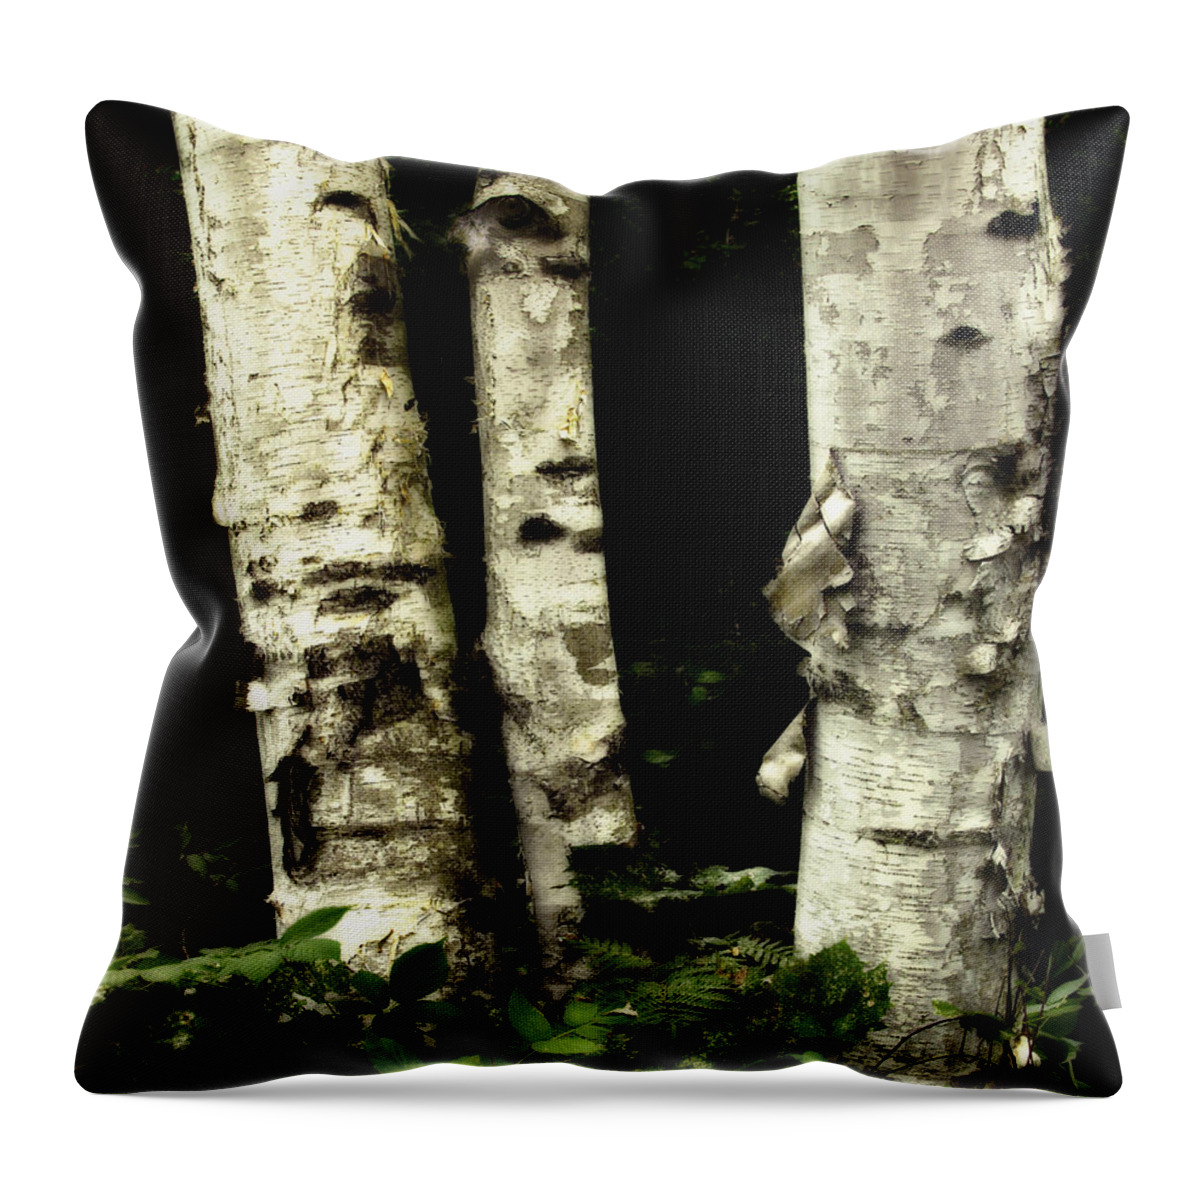 Landscape Throw Pillow featuring the photograph Birch Trio by Claudio Bacinello